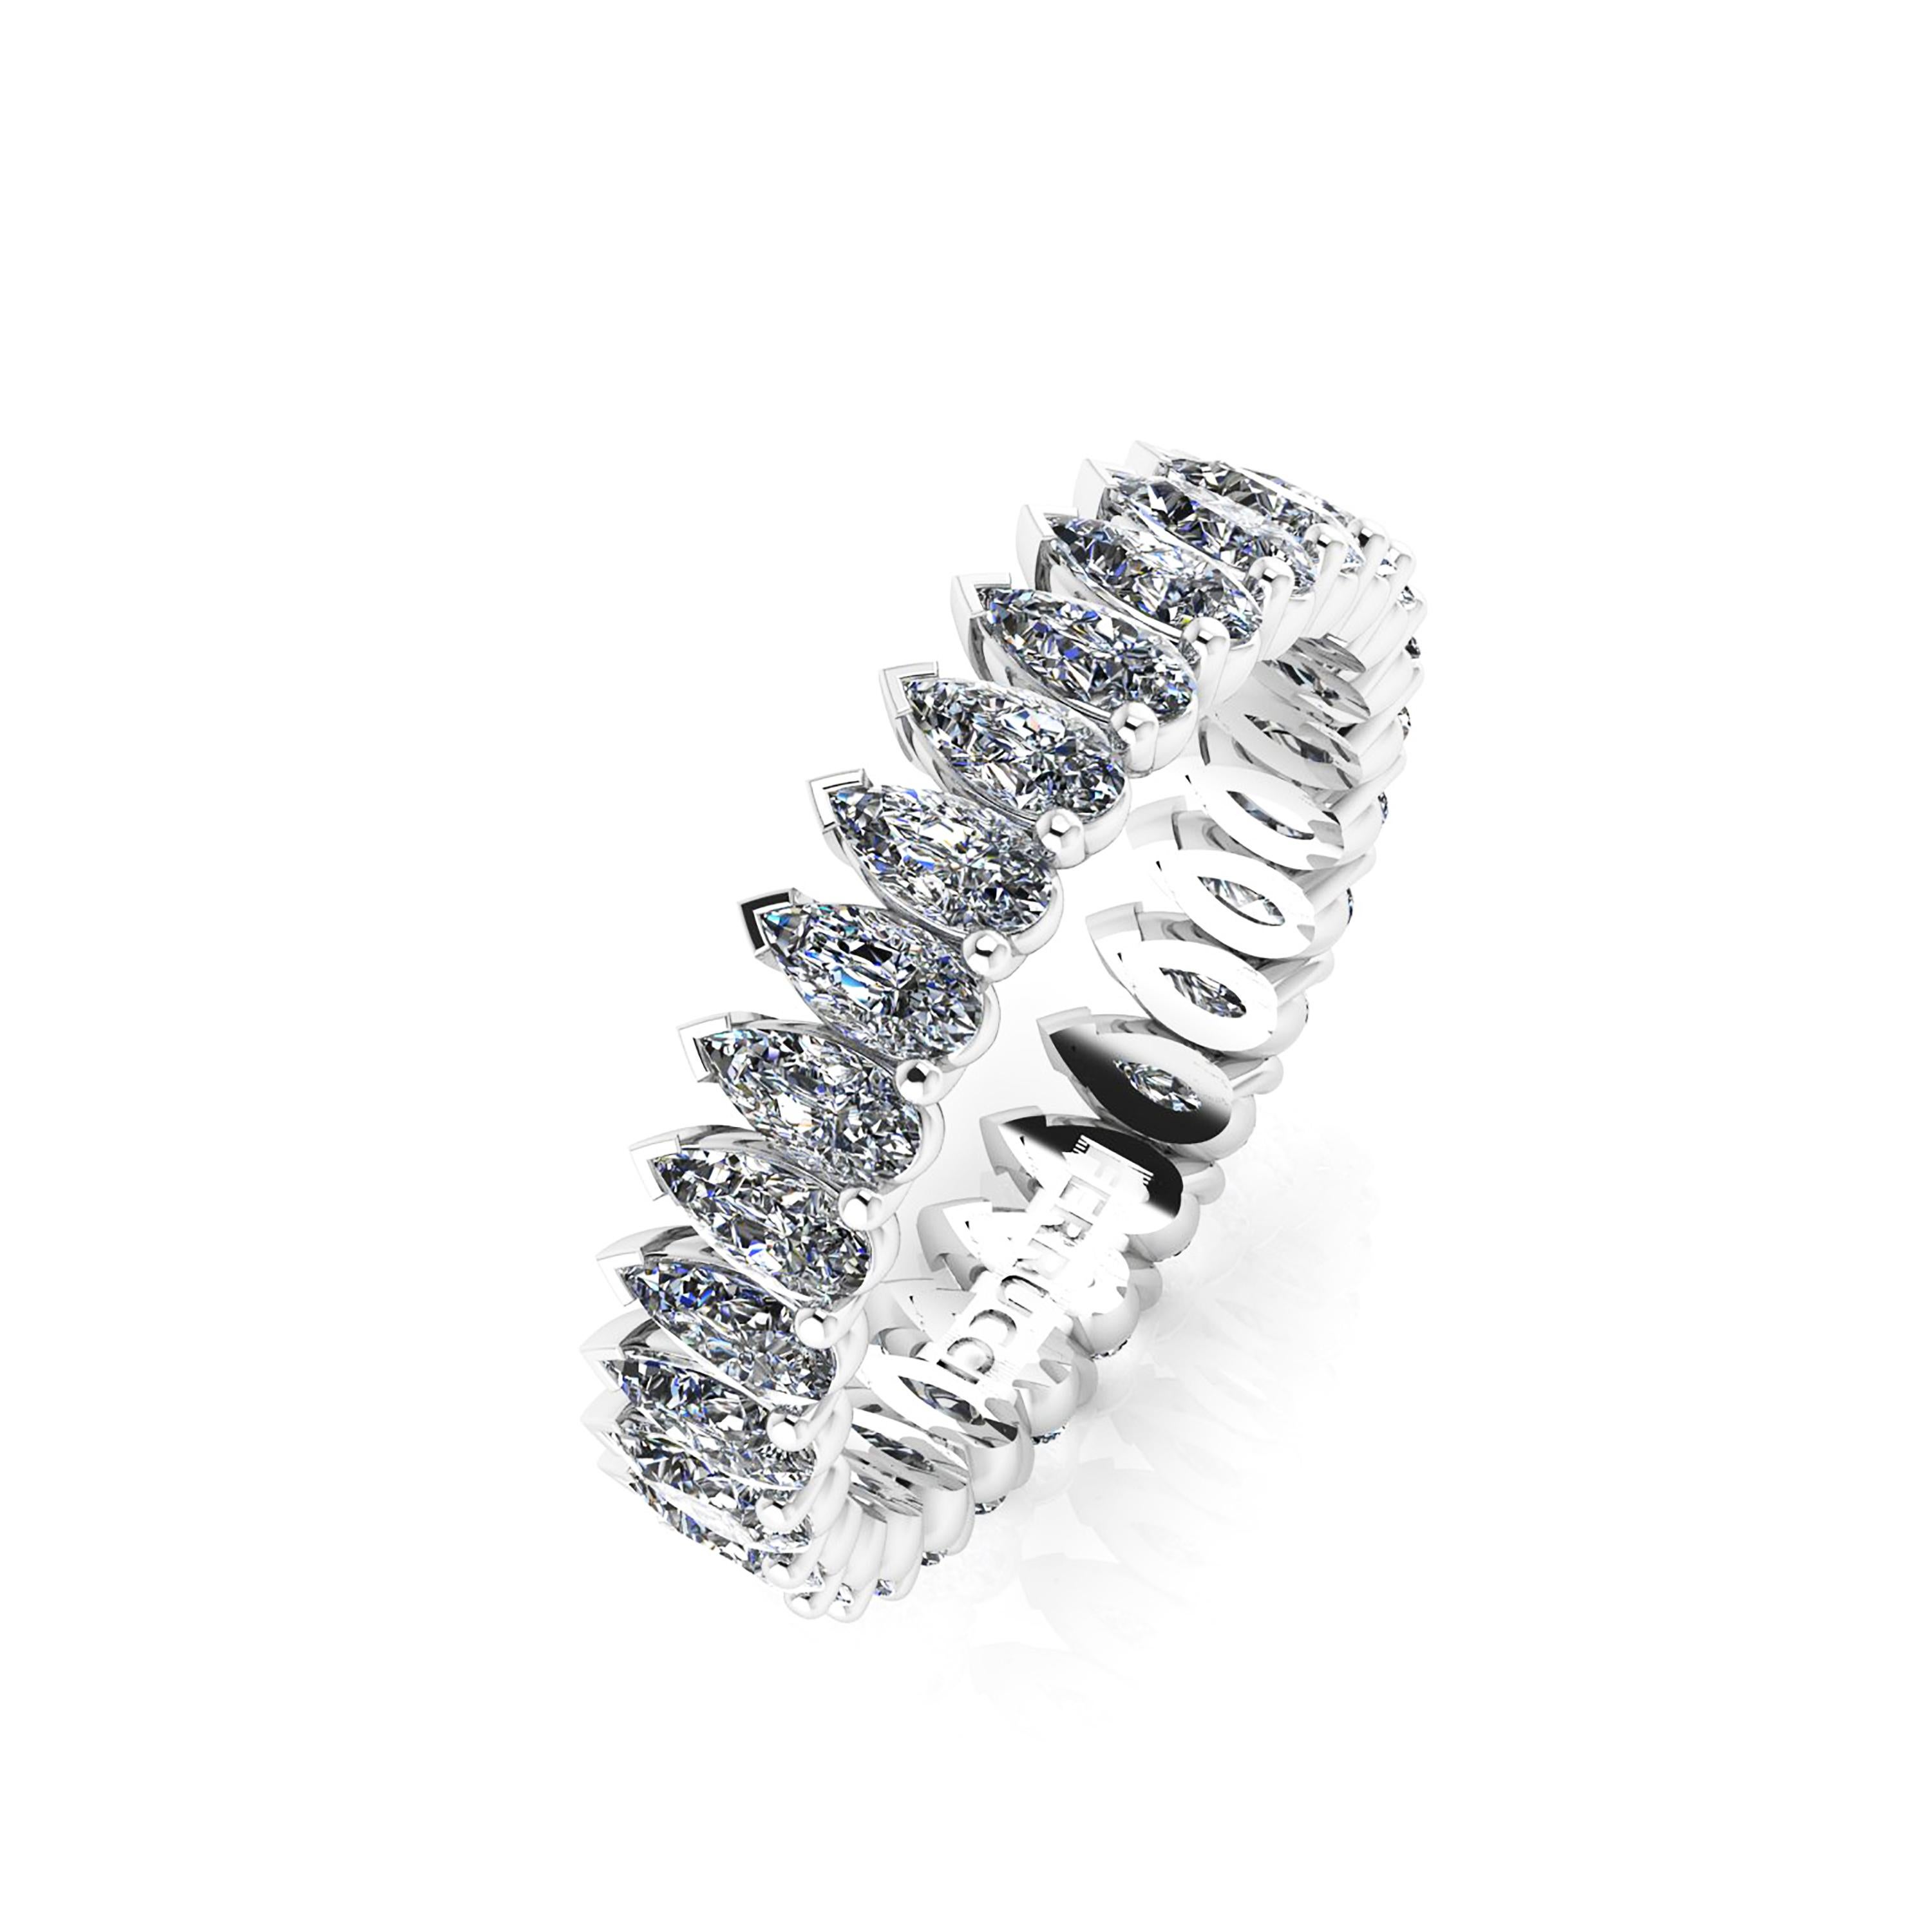 A classic FERRUCCI 1.90 carat of bright white diamonds G color, VS clarity,  pear shape cuts, set to perfection in a hand crafted, Platinum 950 eternity band, 5mm wide, stackable collection, made in New York with the best Italian craftsmanship, size